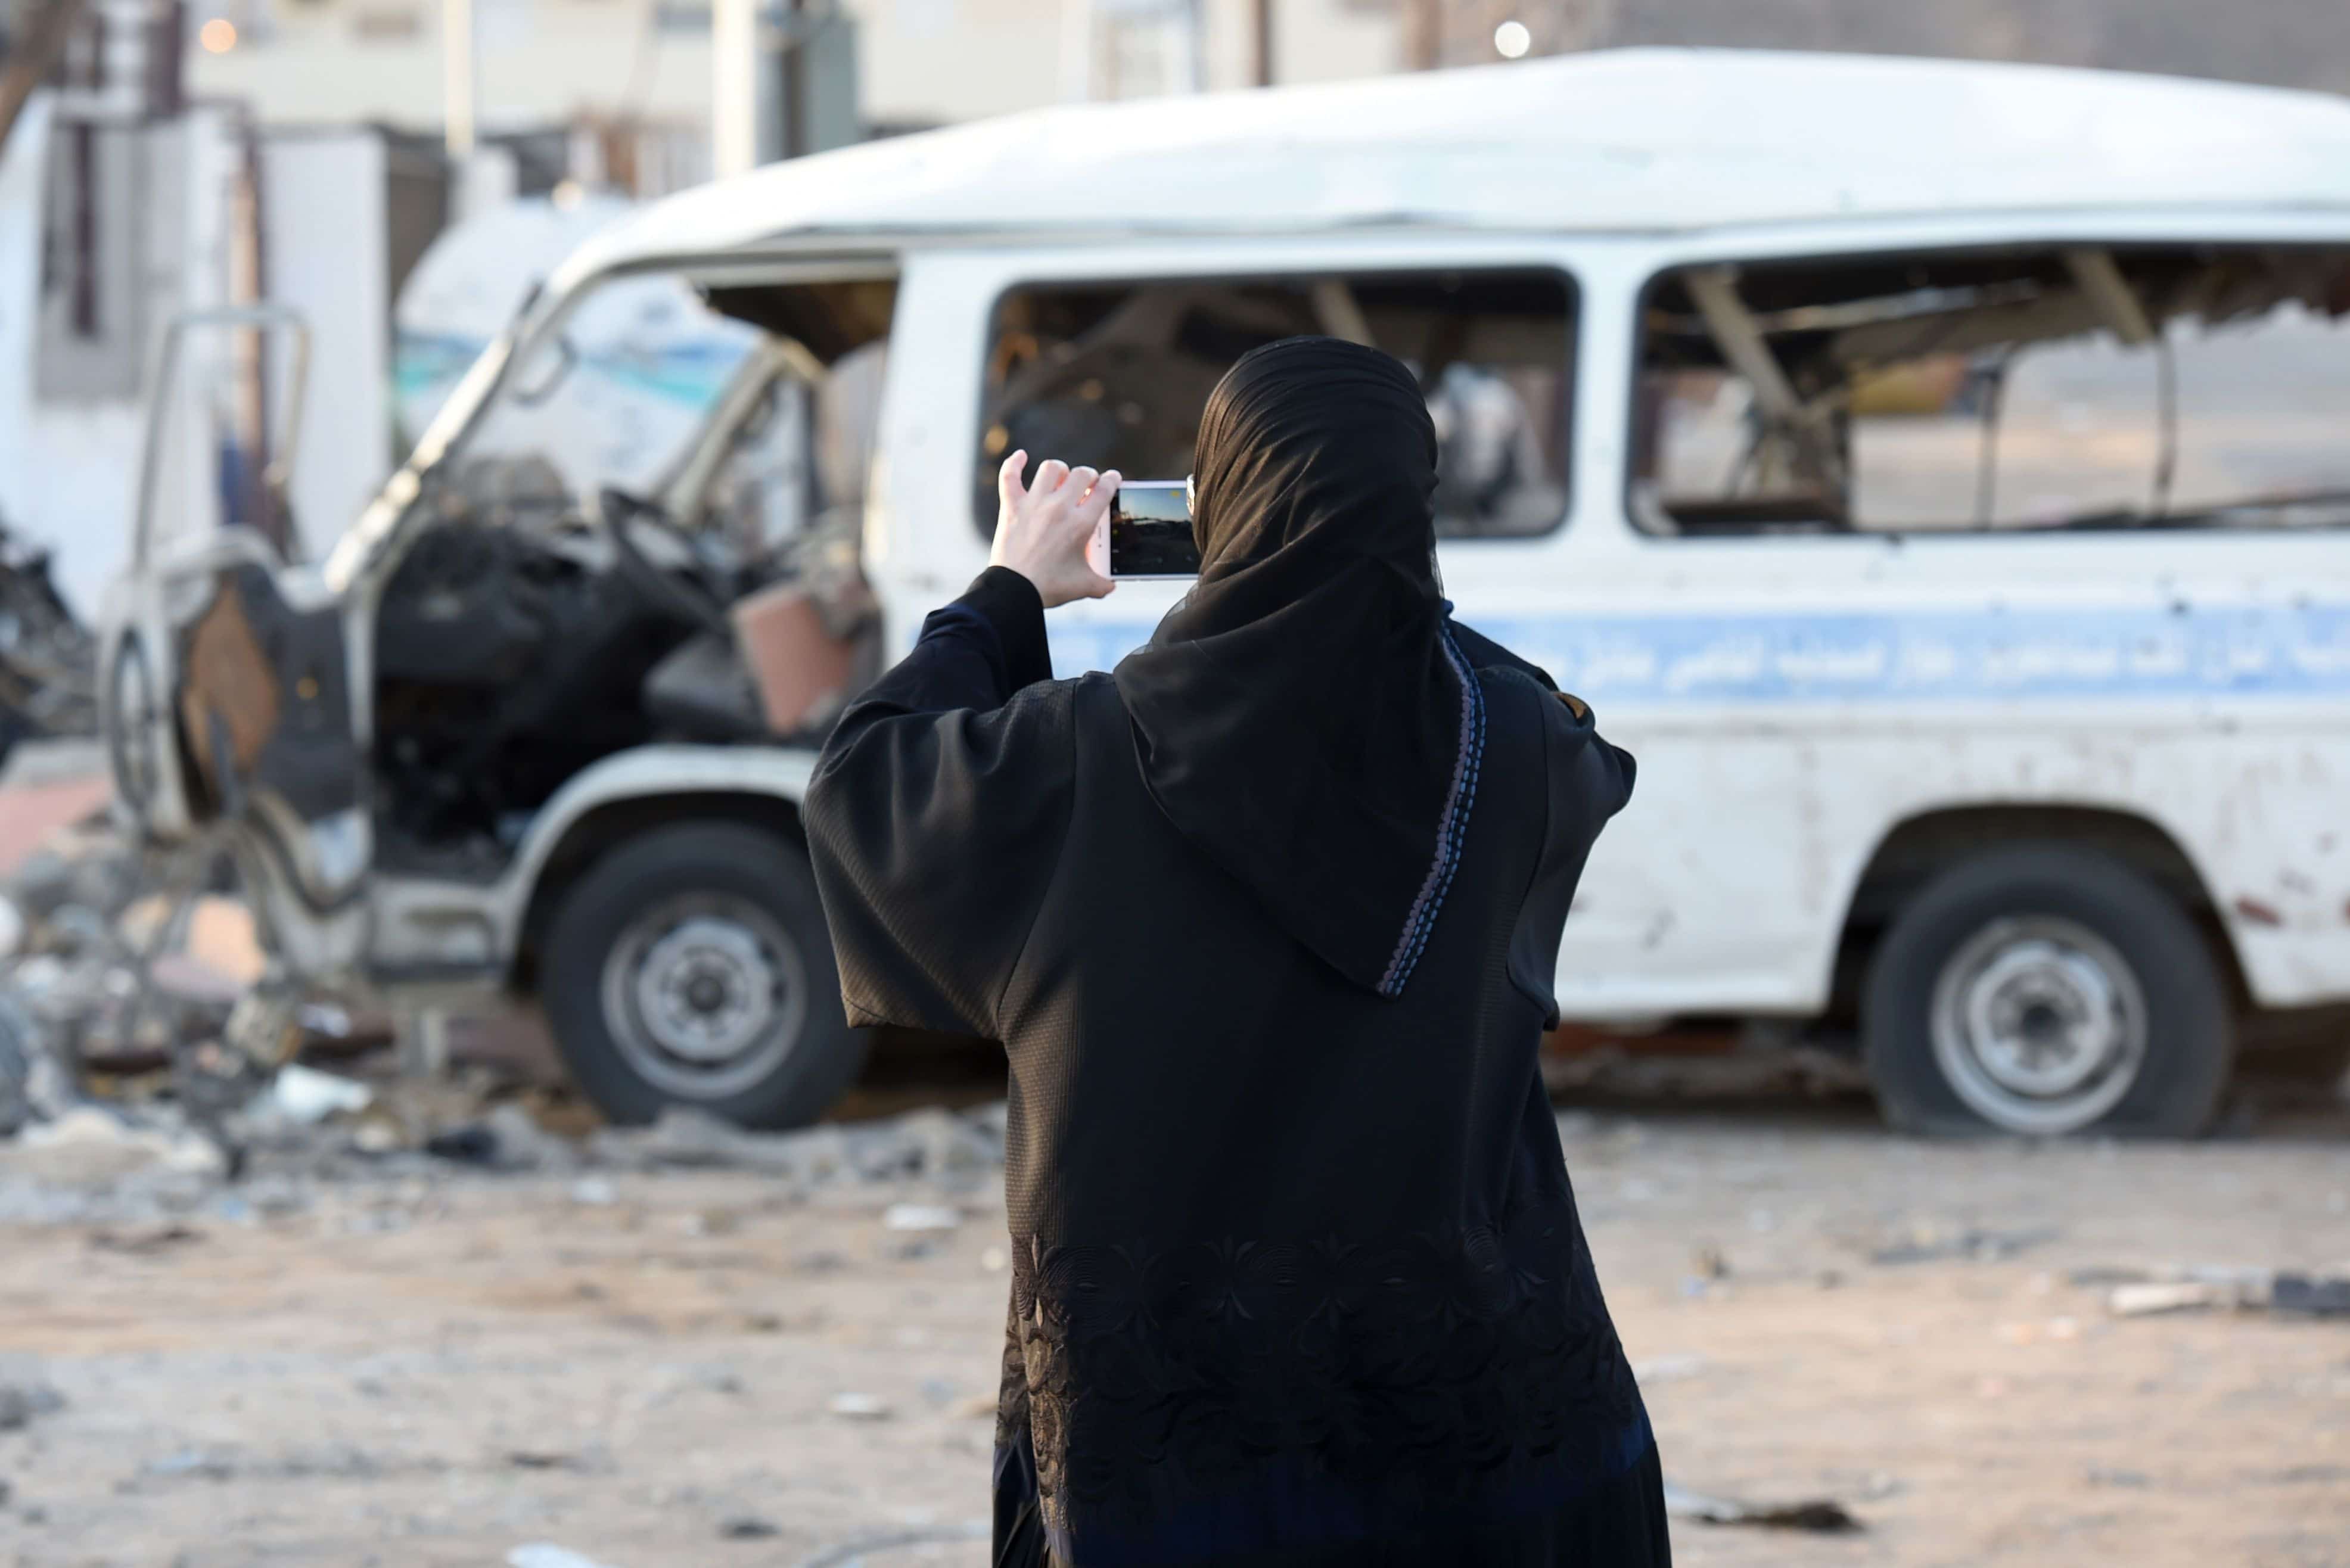 A Saudi female journalist films damage at a market for vehicles in the Saudi border city of Najran, on 27 August 2016, a week after it was struck by a rocket fired from Yemen, FAYEZ NURELDINE/AFP/Getty Images